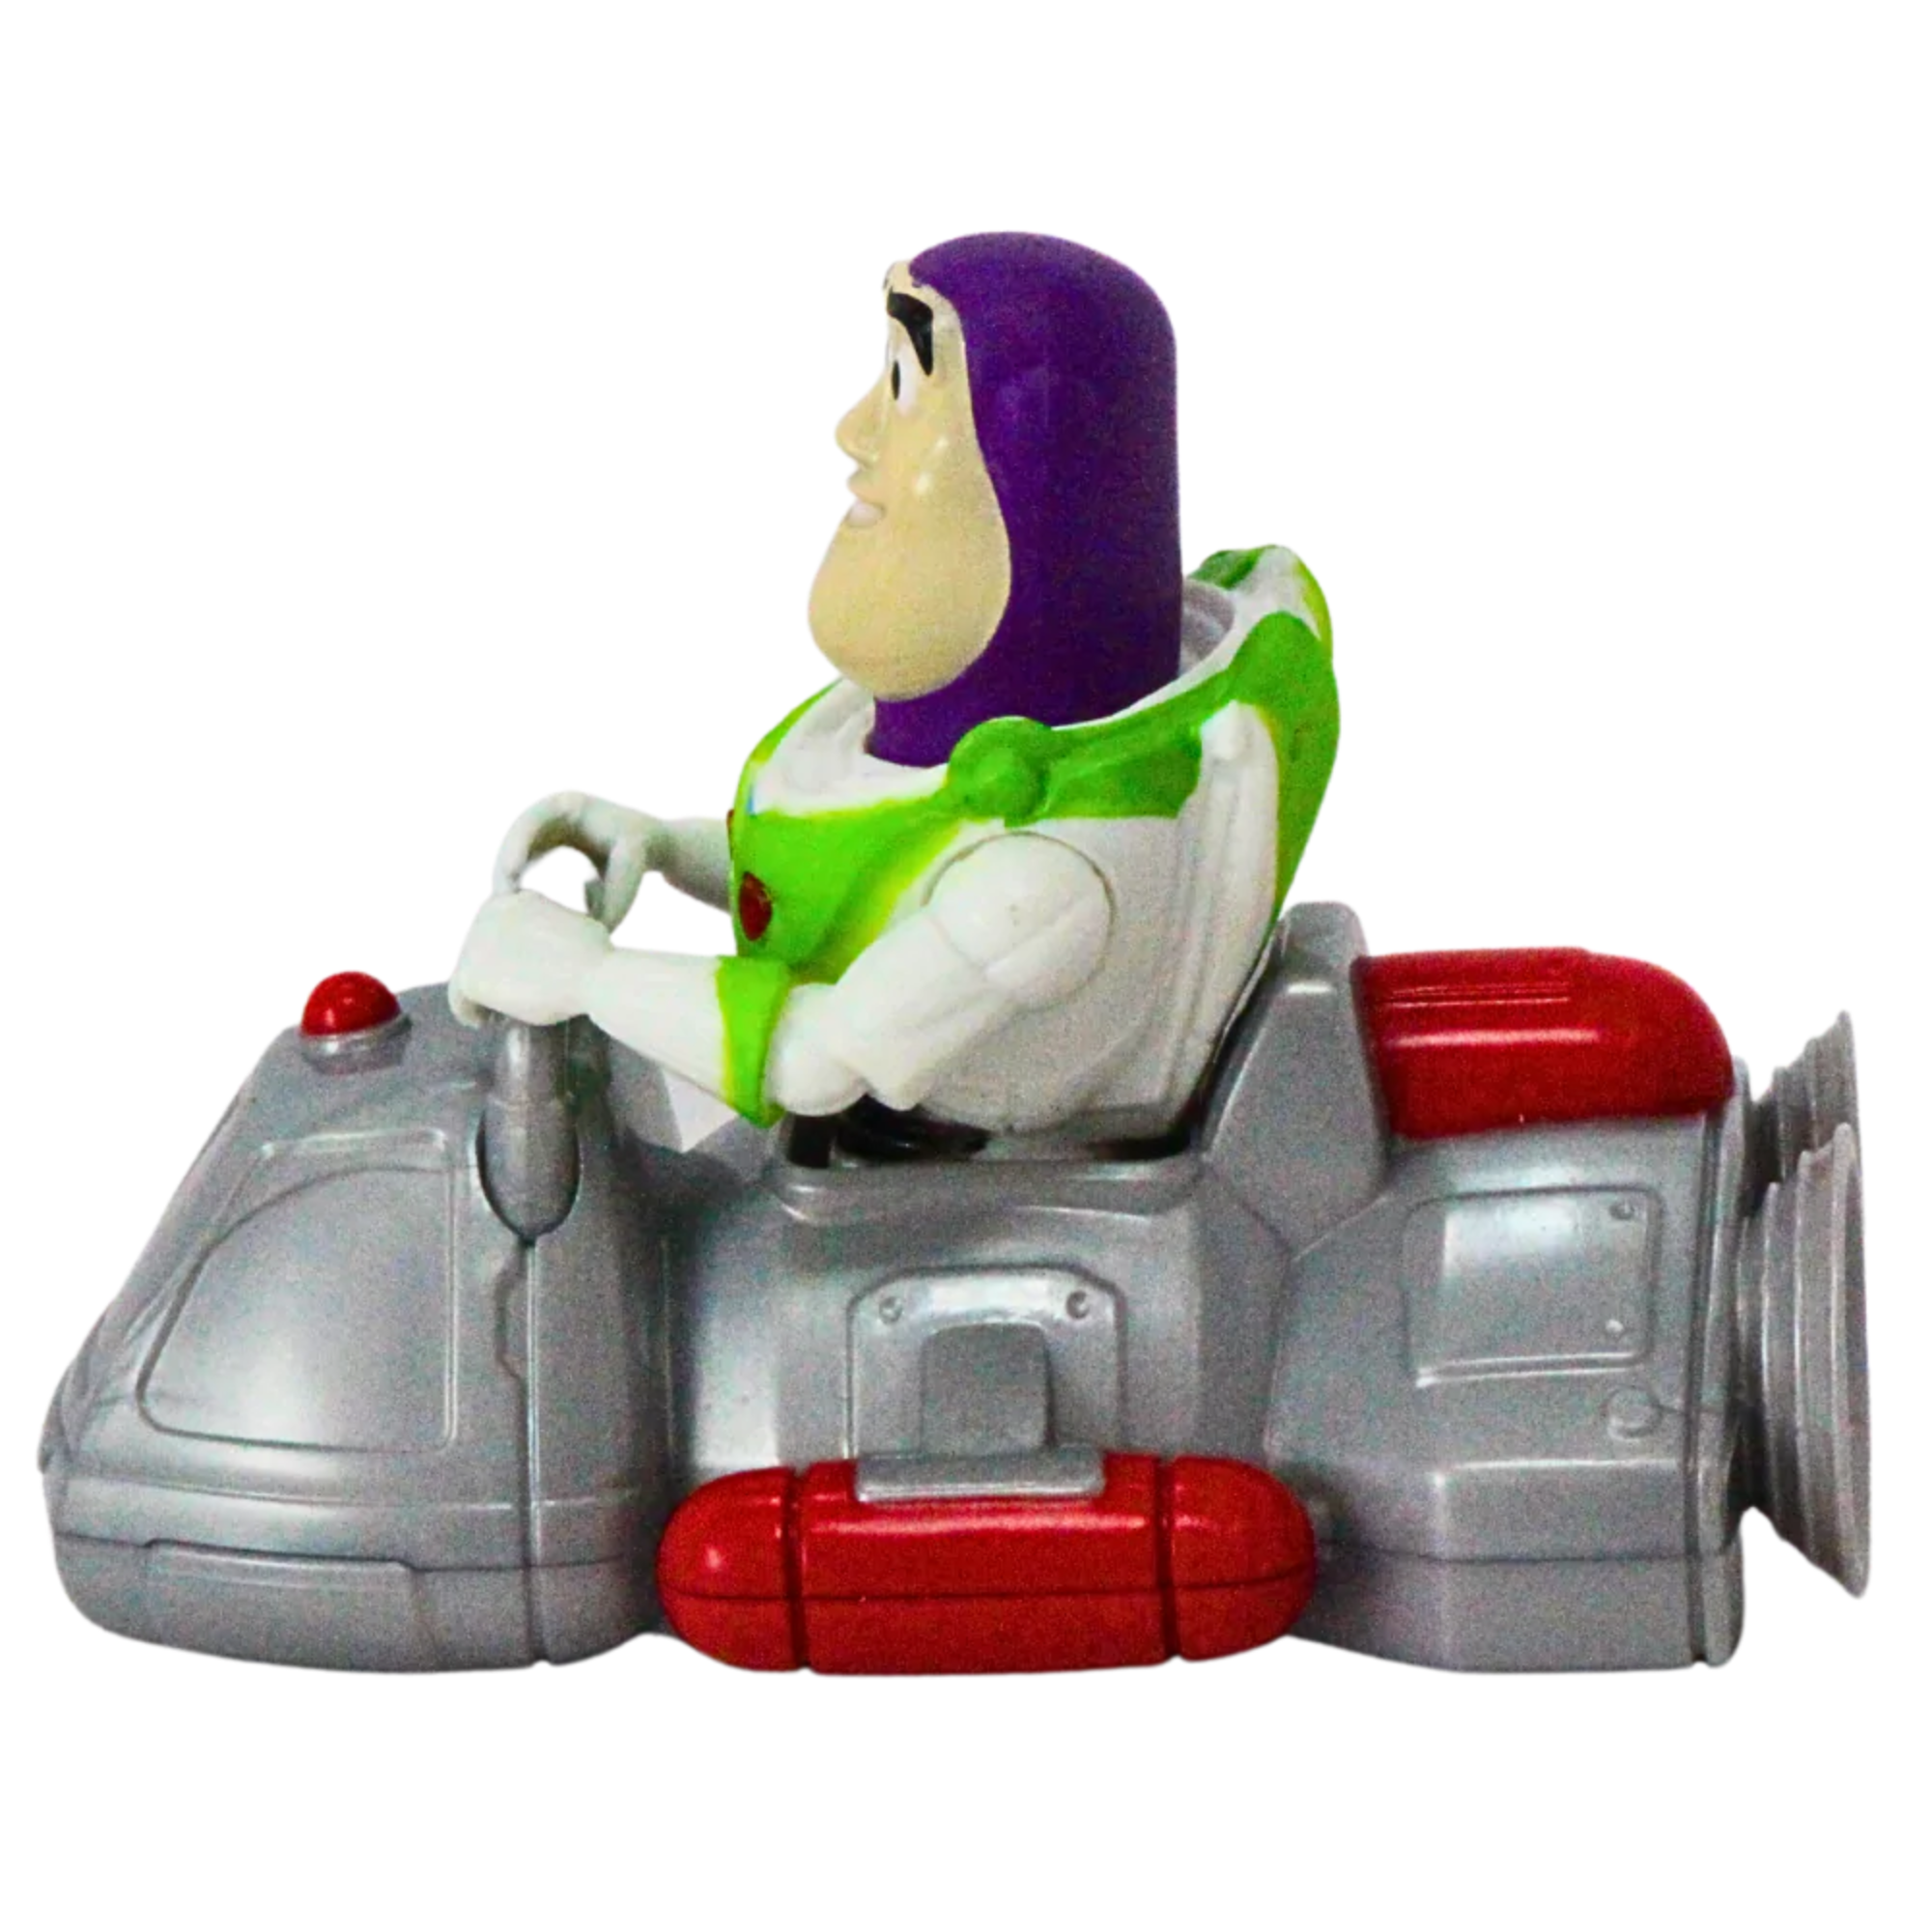 Toy Story 4 Soft Foam 6 Tile Pieces Megamat With Buzz Character in Vehicle - Toptoys2u